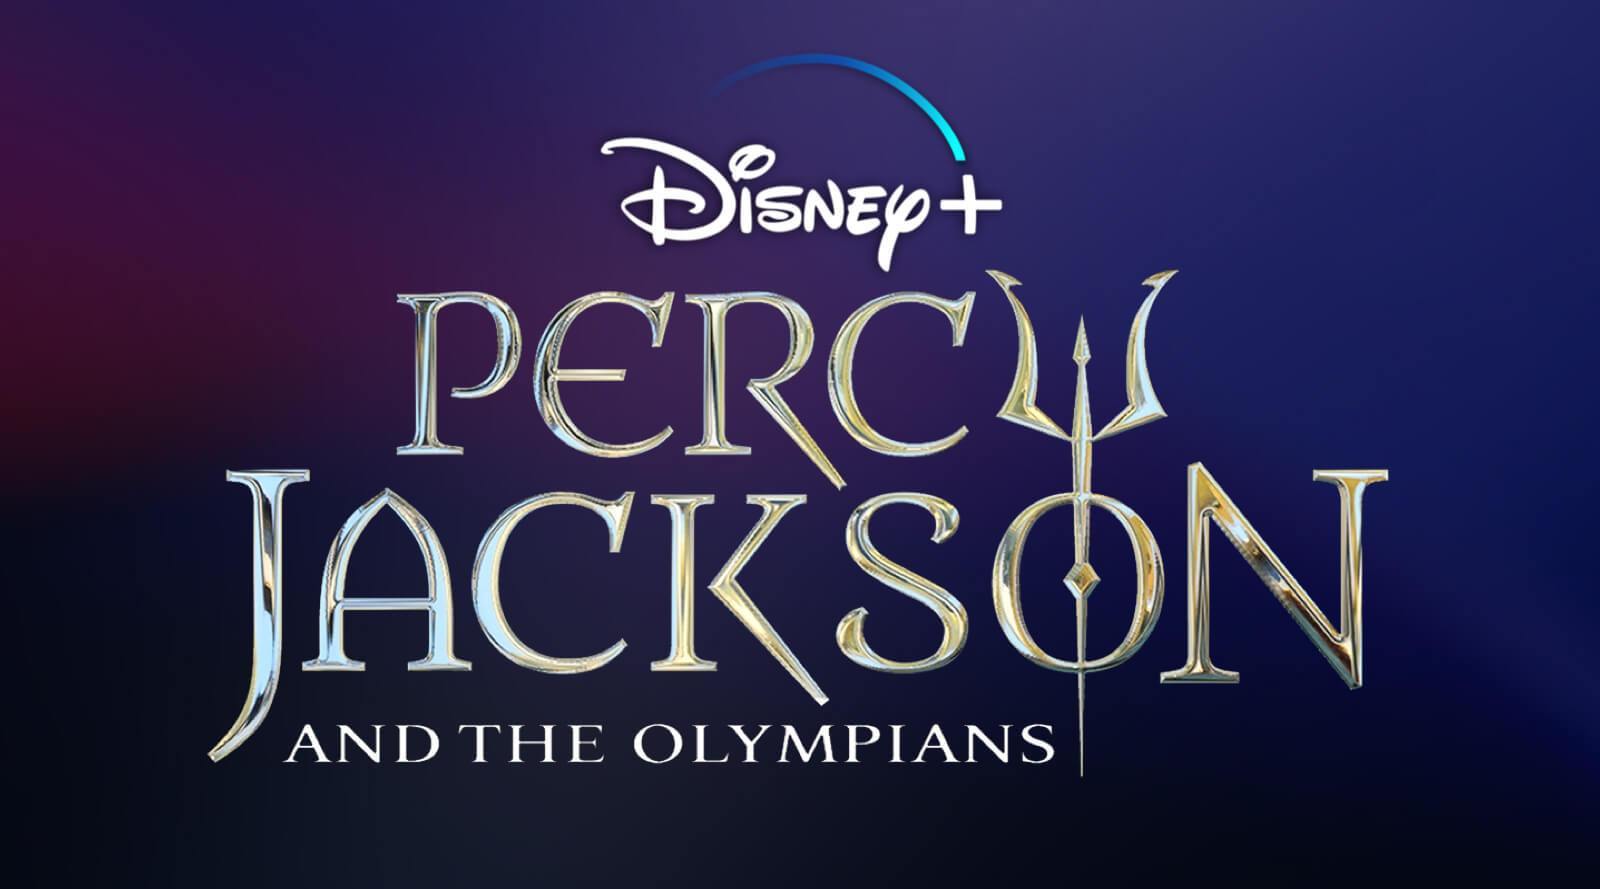 Percy Jackson and the Olympians Cast, Role, Salary, Director, Producer, Trailer